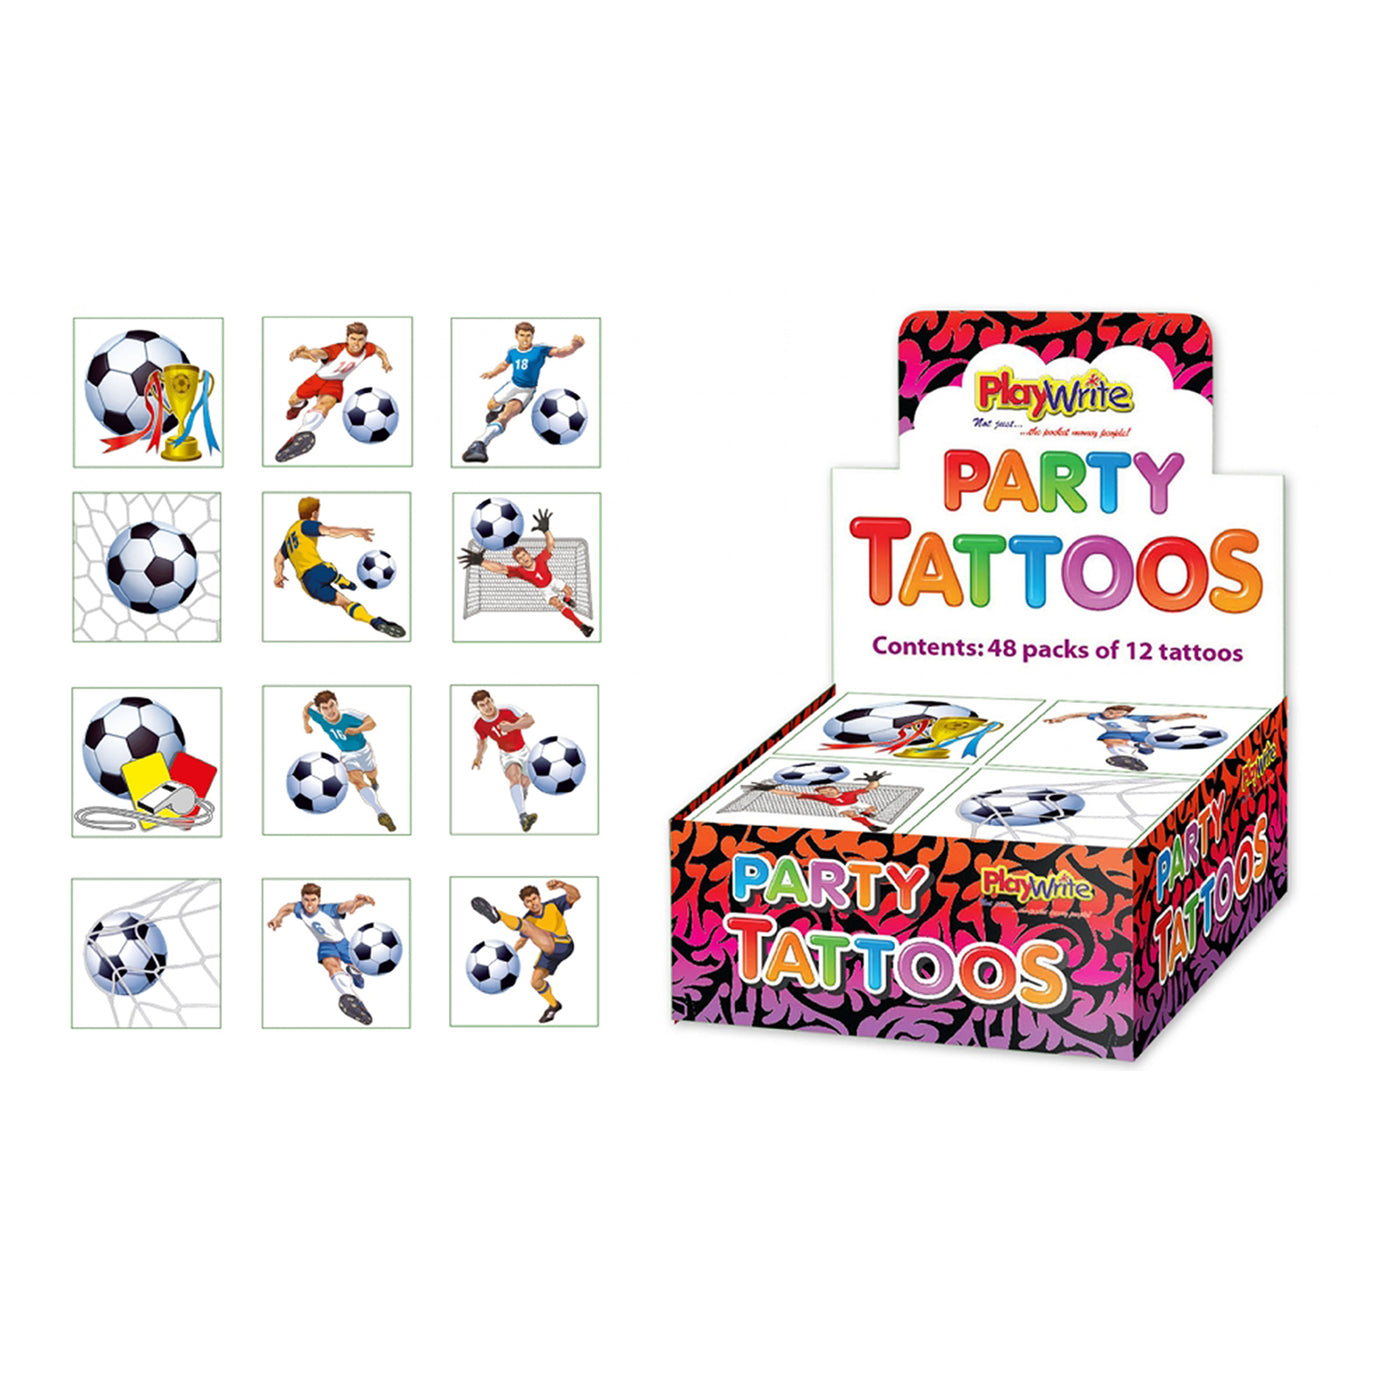 Children's Football Shirts Design Pre Filled Football Party Bags, Party Favours With Toys, Football Trophy And Sweets.